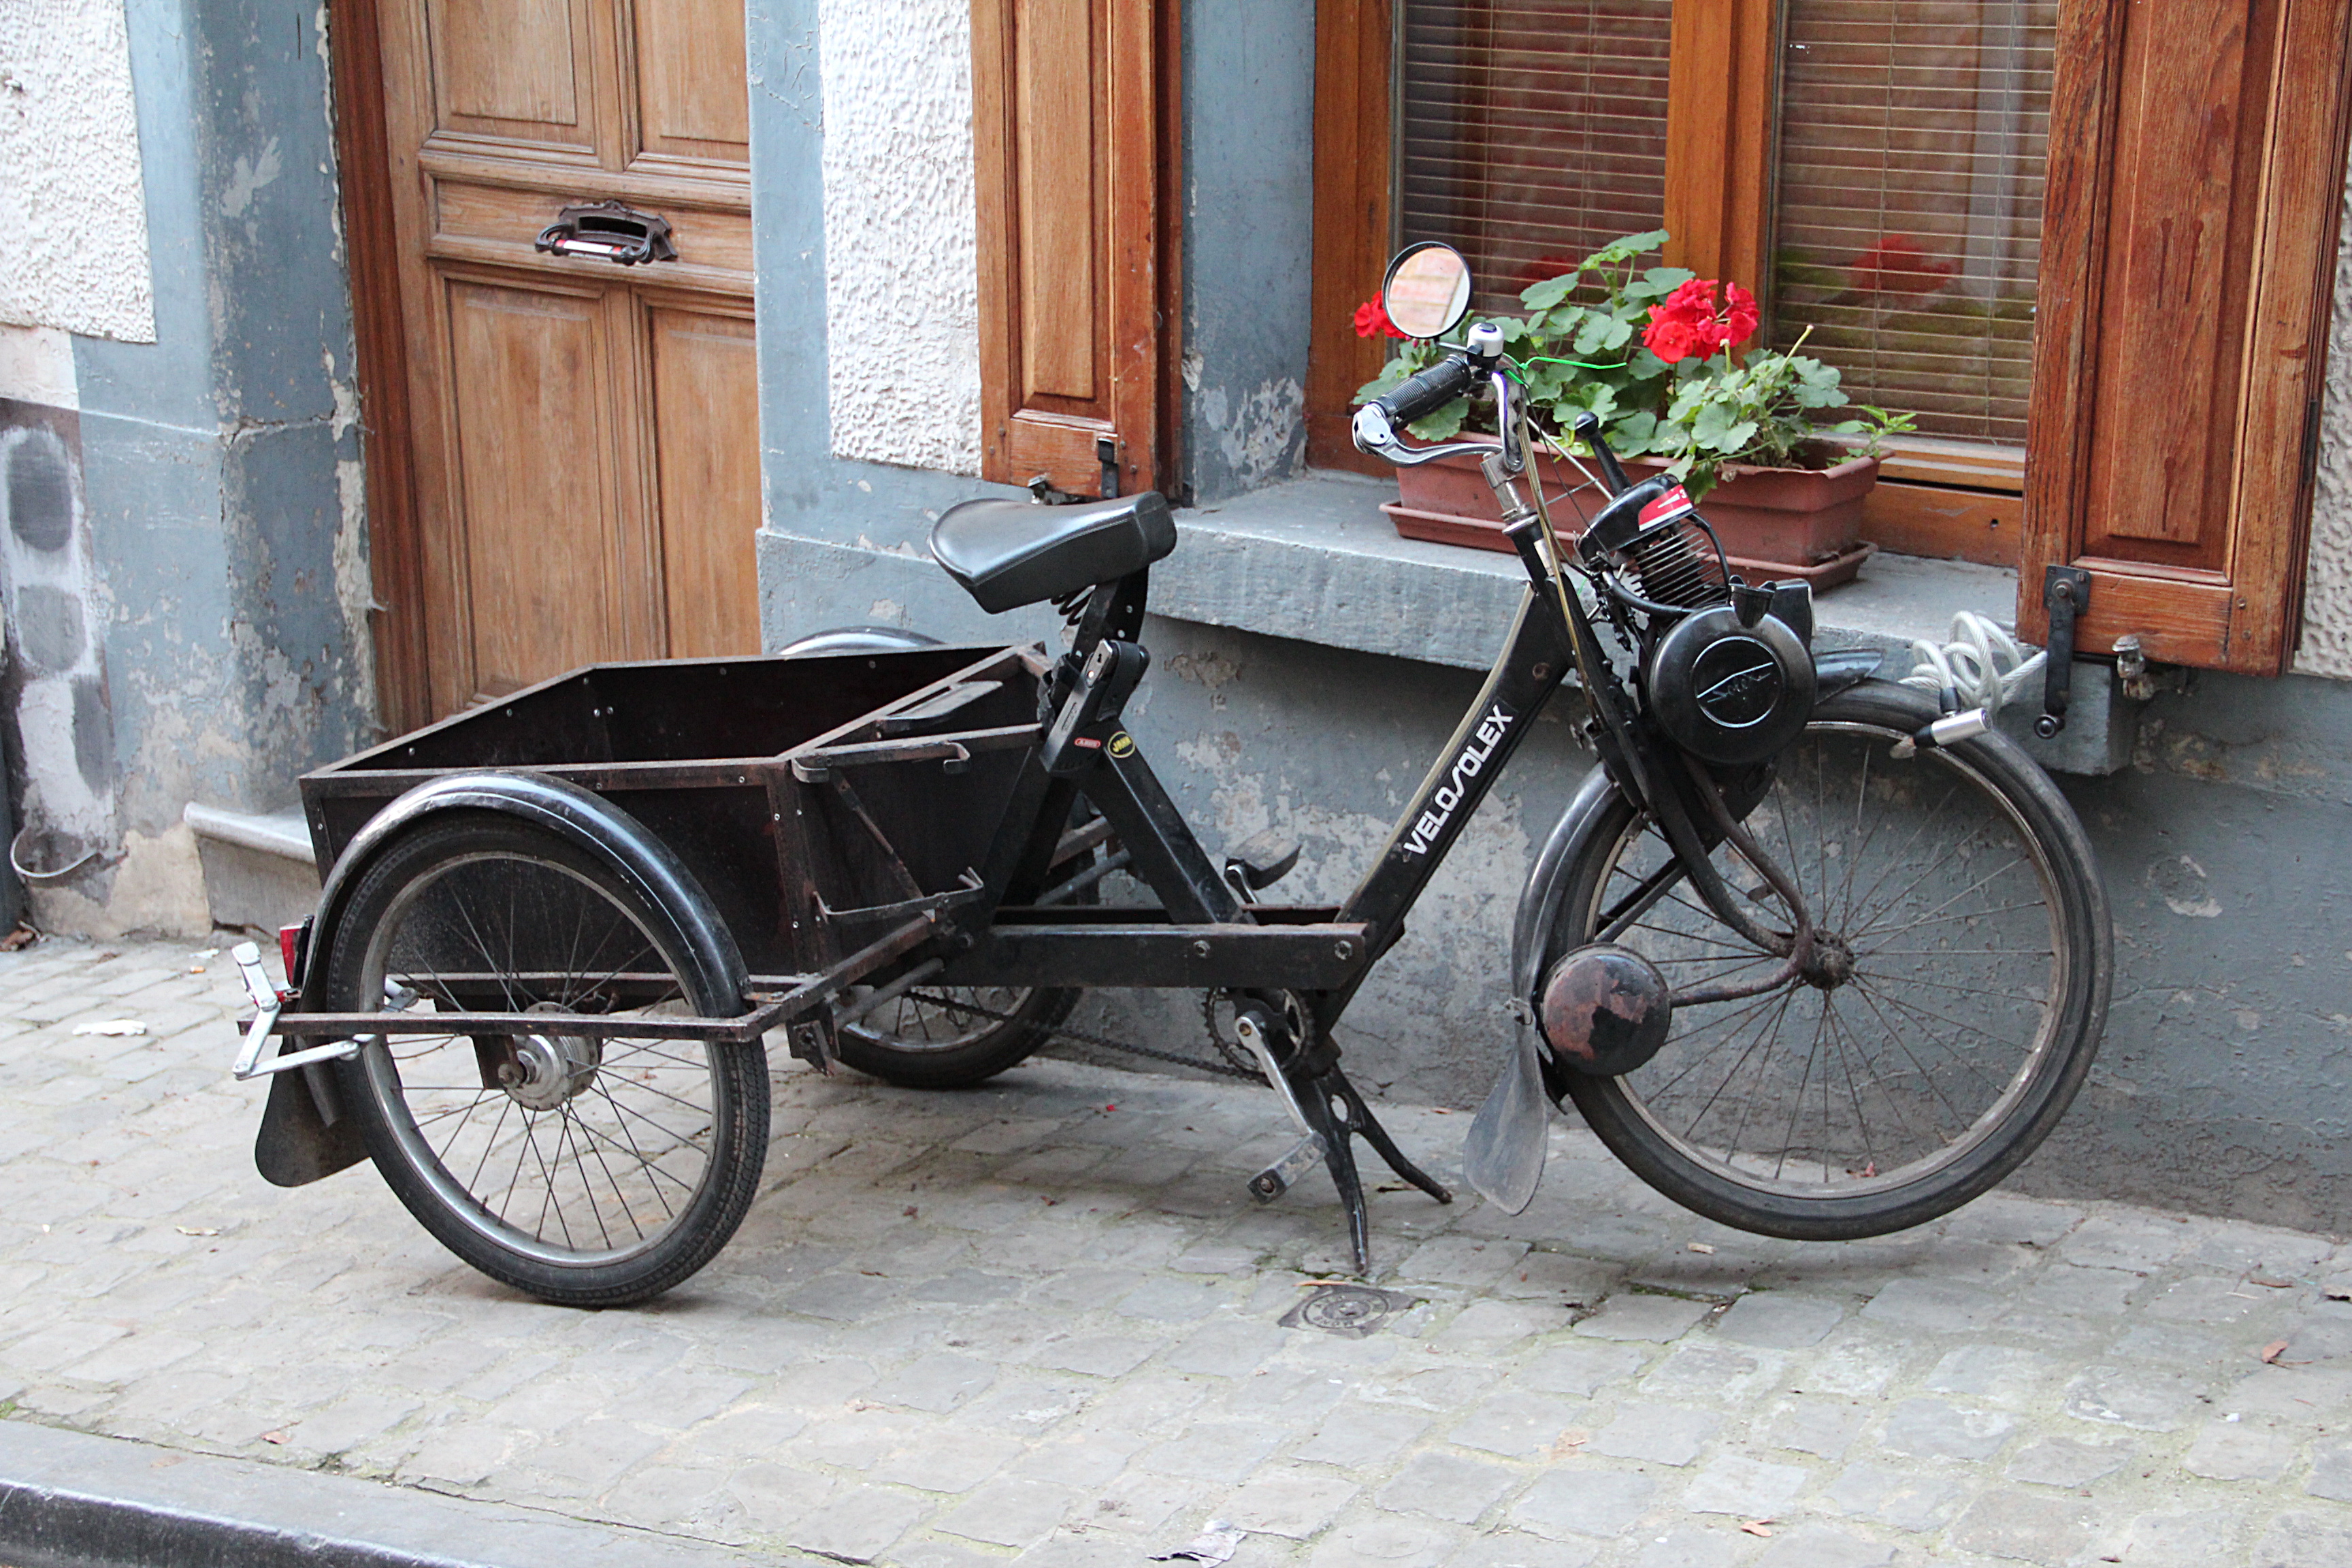 http://upload.wikimedia.org/wikipedia/commons/8/80/Tricycle_V%C3%A9loSolex_-_Mons_161112.JPG